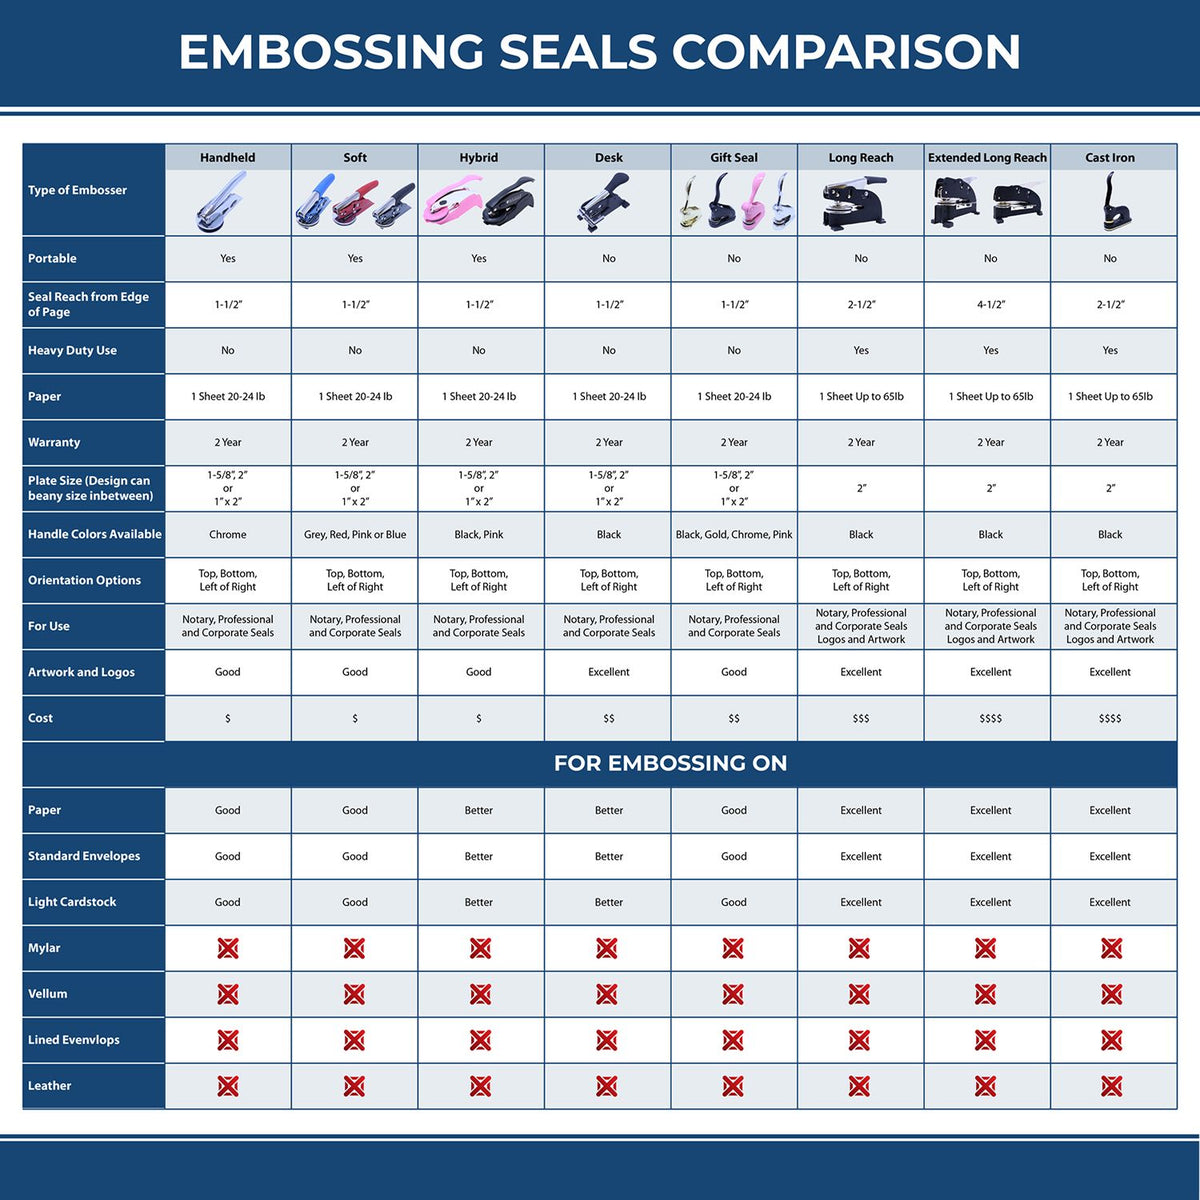 A comparison chart for the different types of mount models available for the Hybrid Idaho Geologist Seal